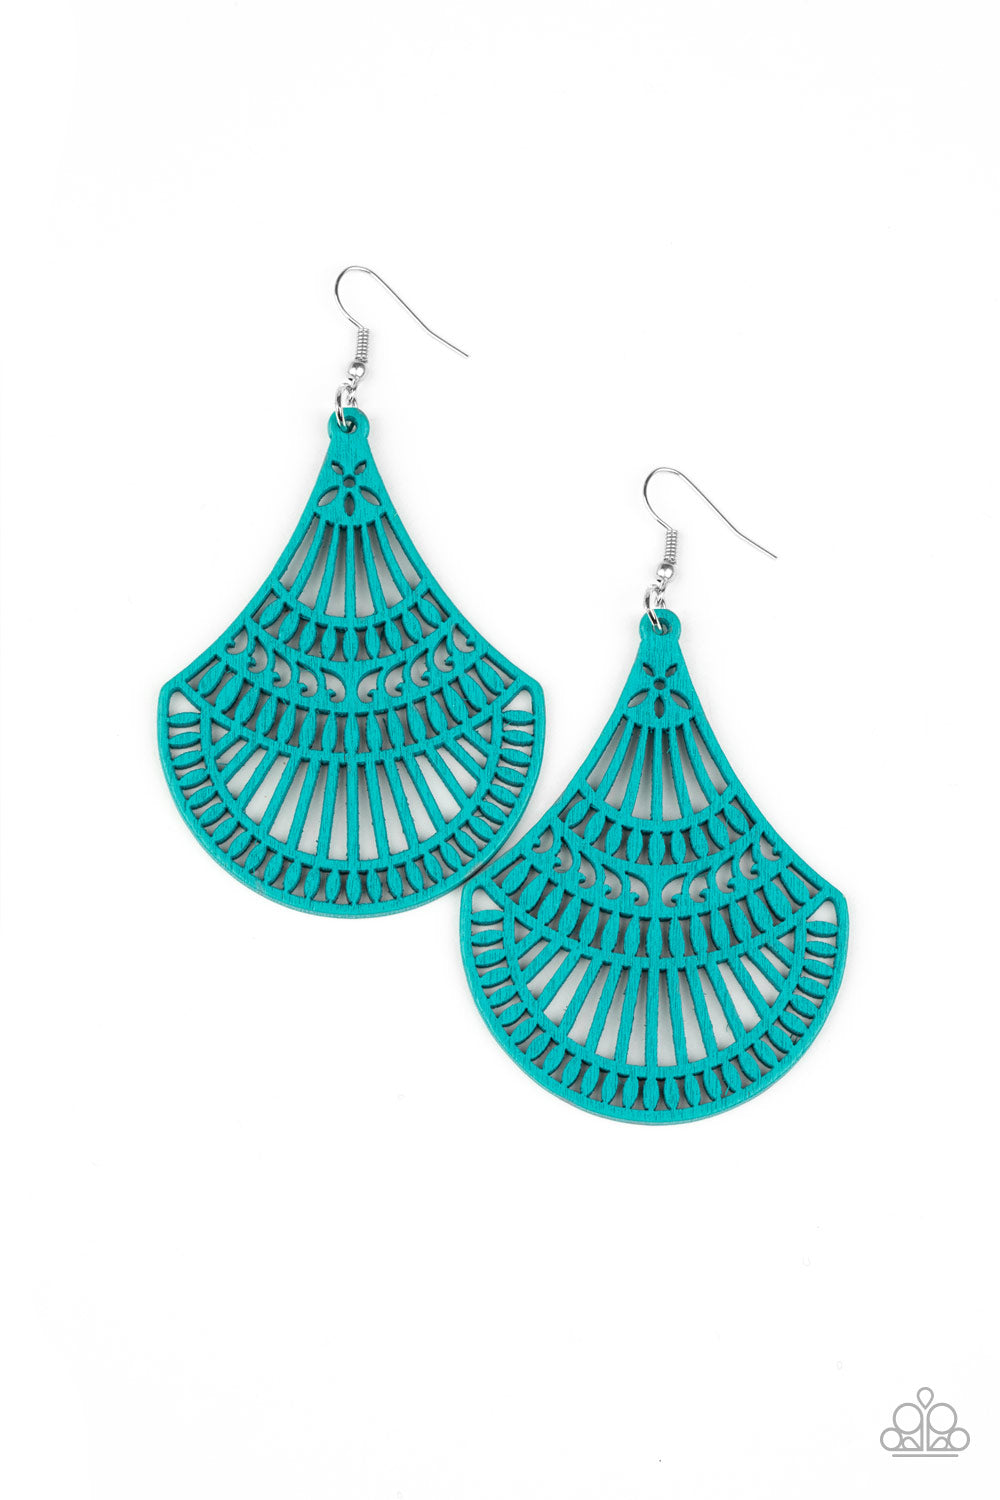 Paparazzi Accessories - Tropical Tempest - Blue Earrings